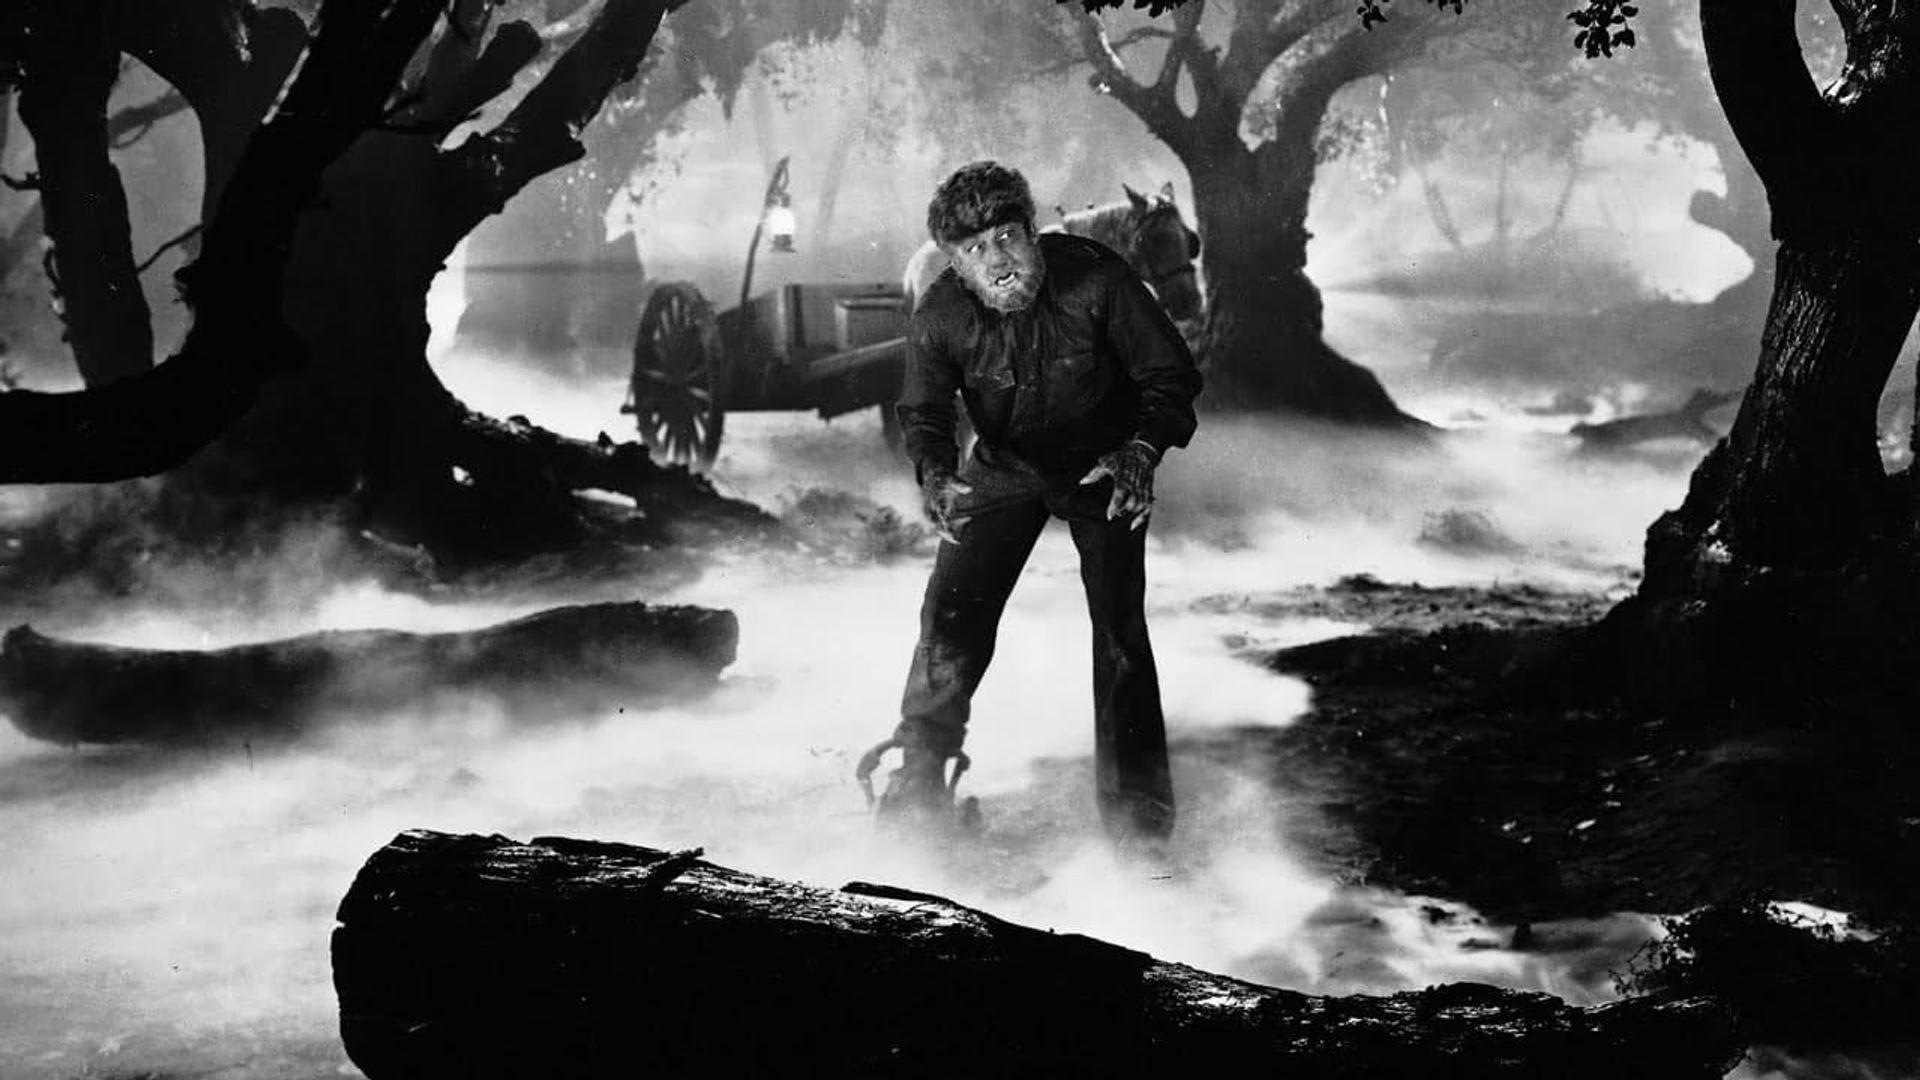 Monster by Moonlight! The Immortal Saga of 'The Wolf Man' background